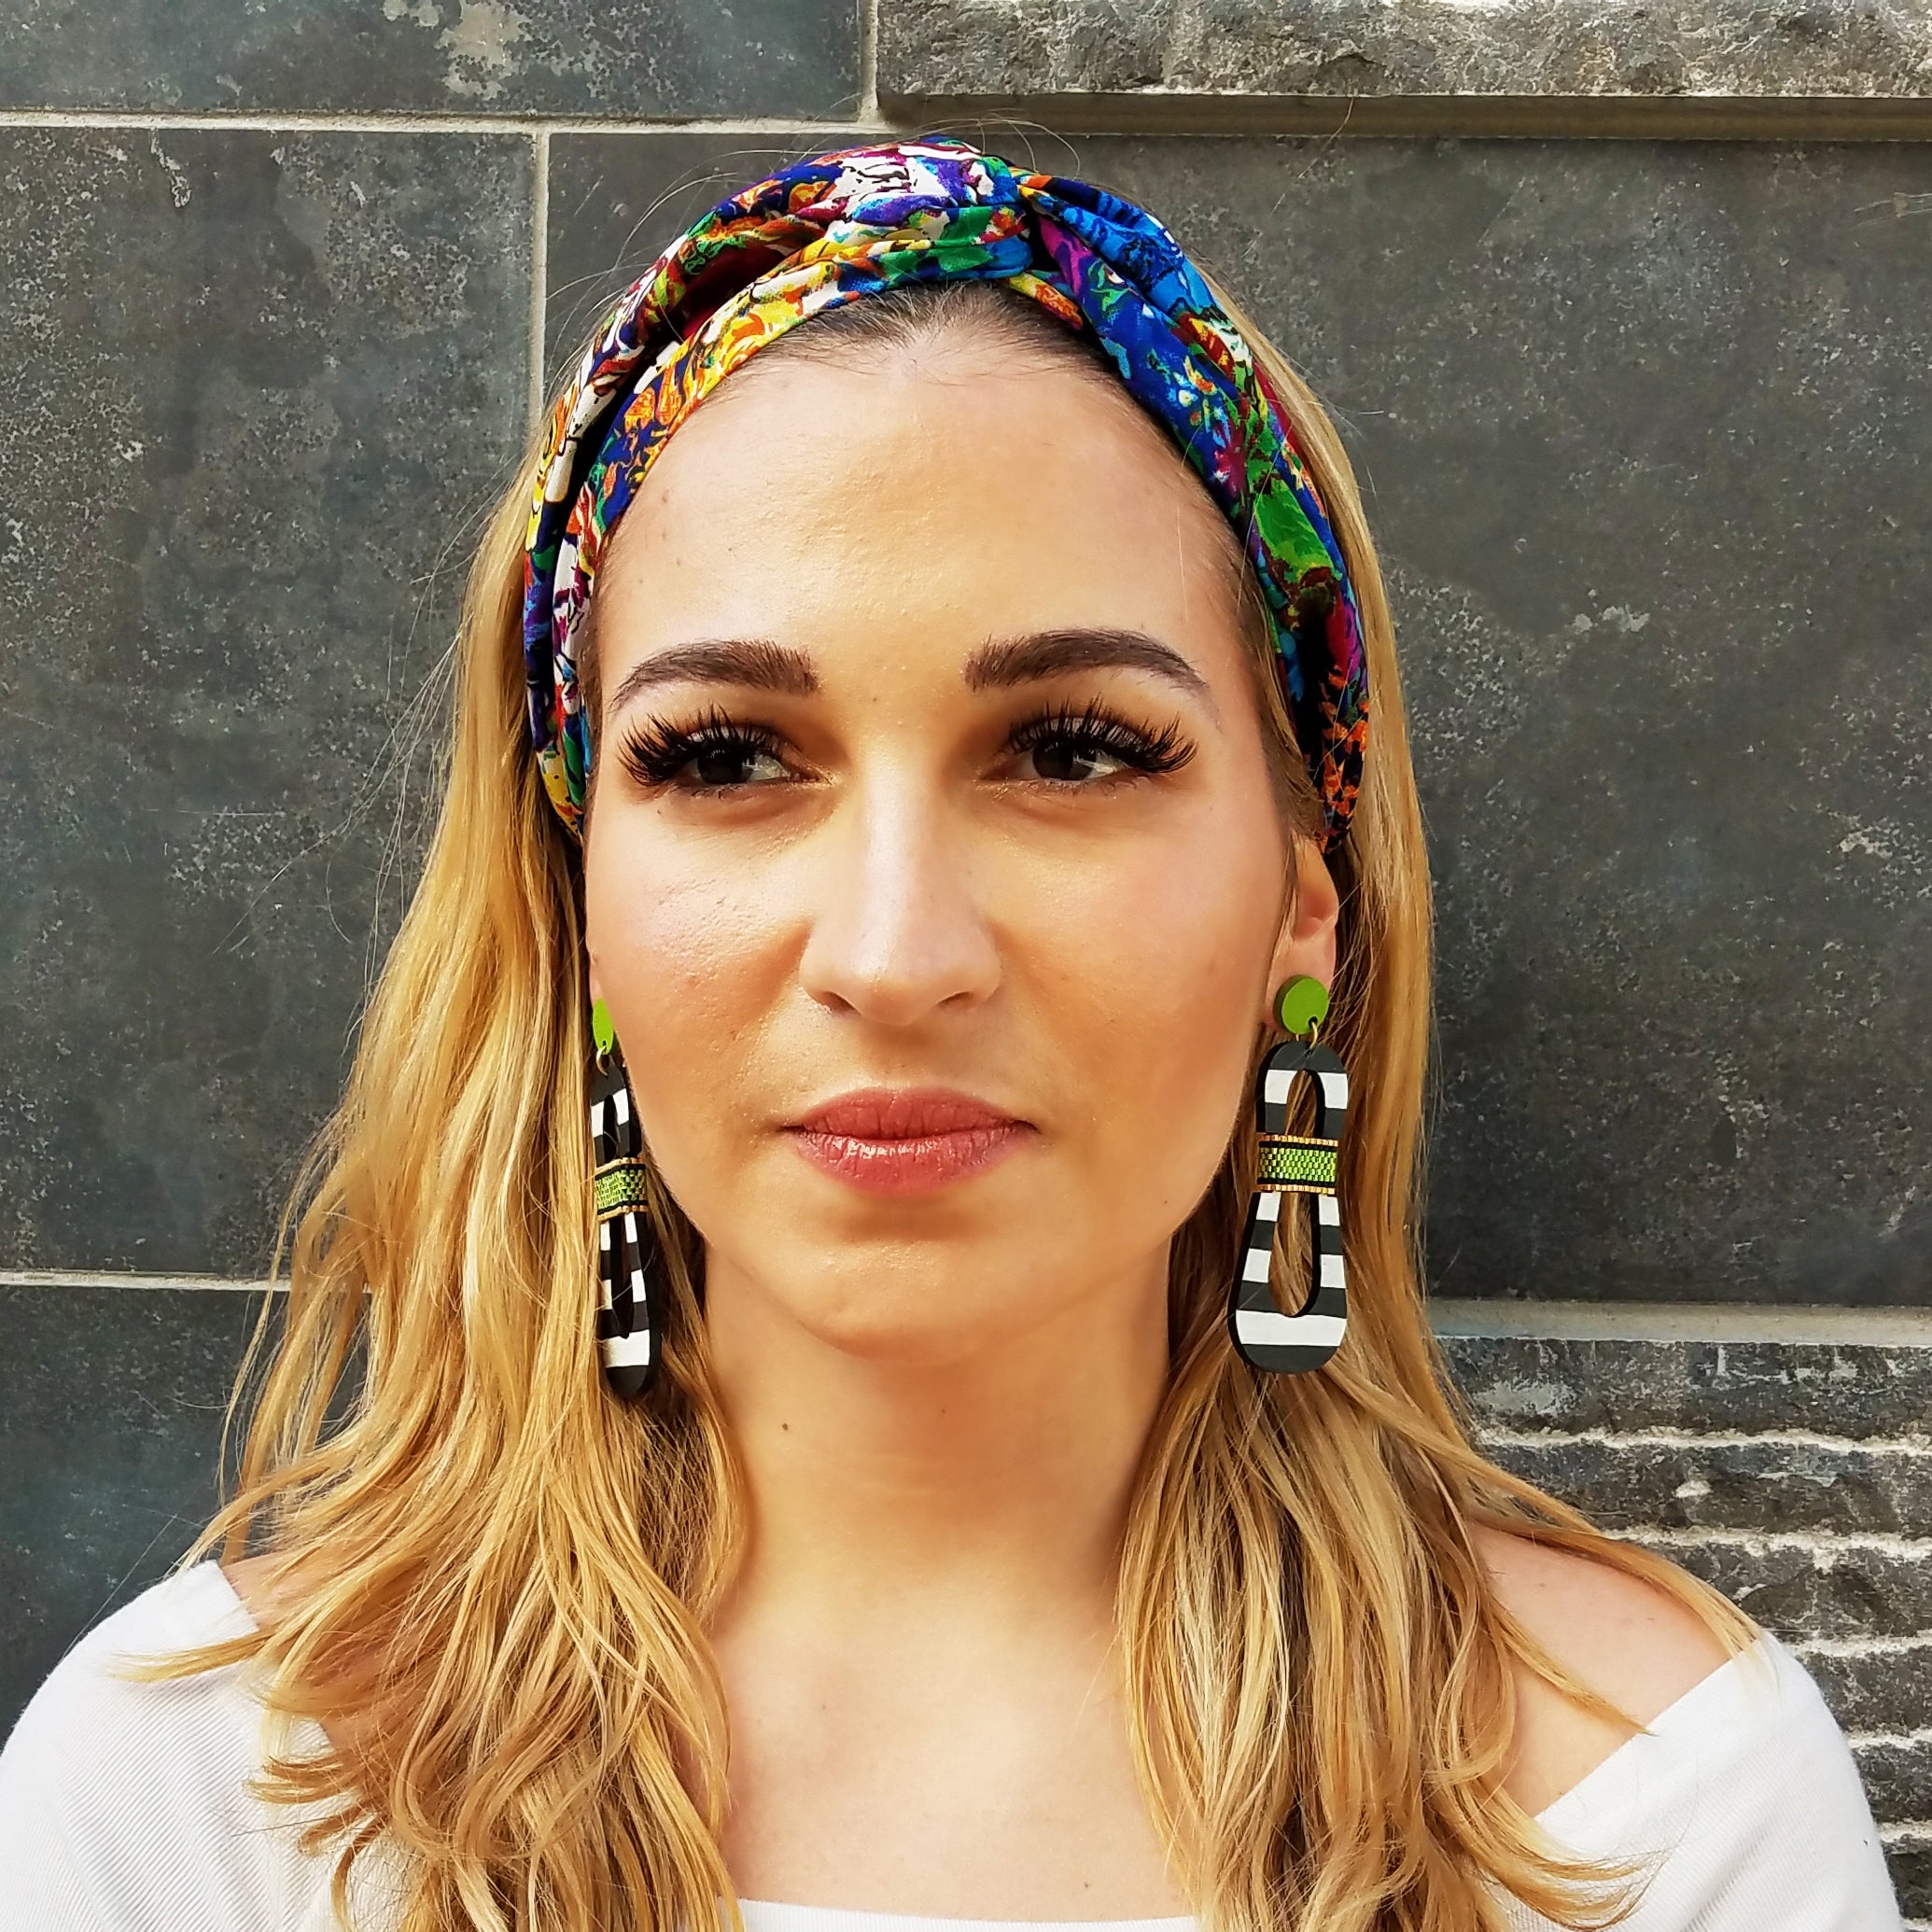 Model with colorful headband wearing modern, curvy, black and white striped statement earrings with hand-beaded chartreuse accents by the brand SCOTCHBONNET.